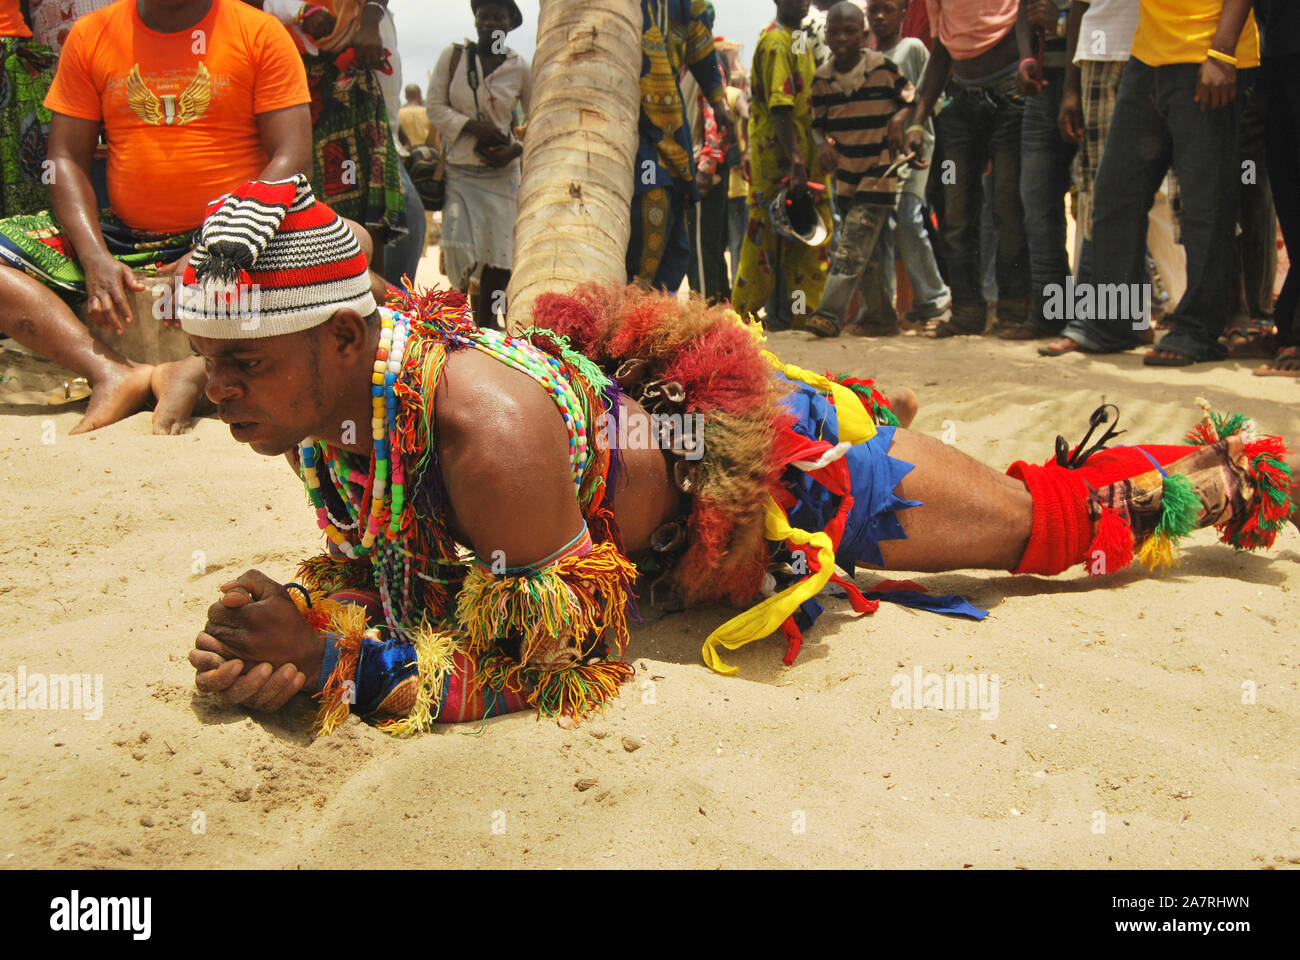 A young man dancing during the Annual Black Heritage Festival, Badagry Lagos, Nigeria. Stock Photo